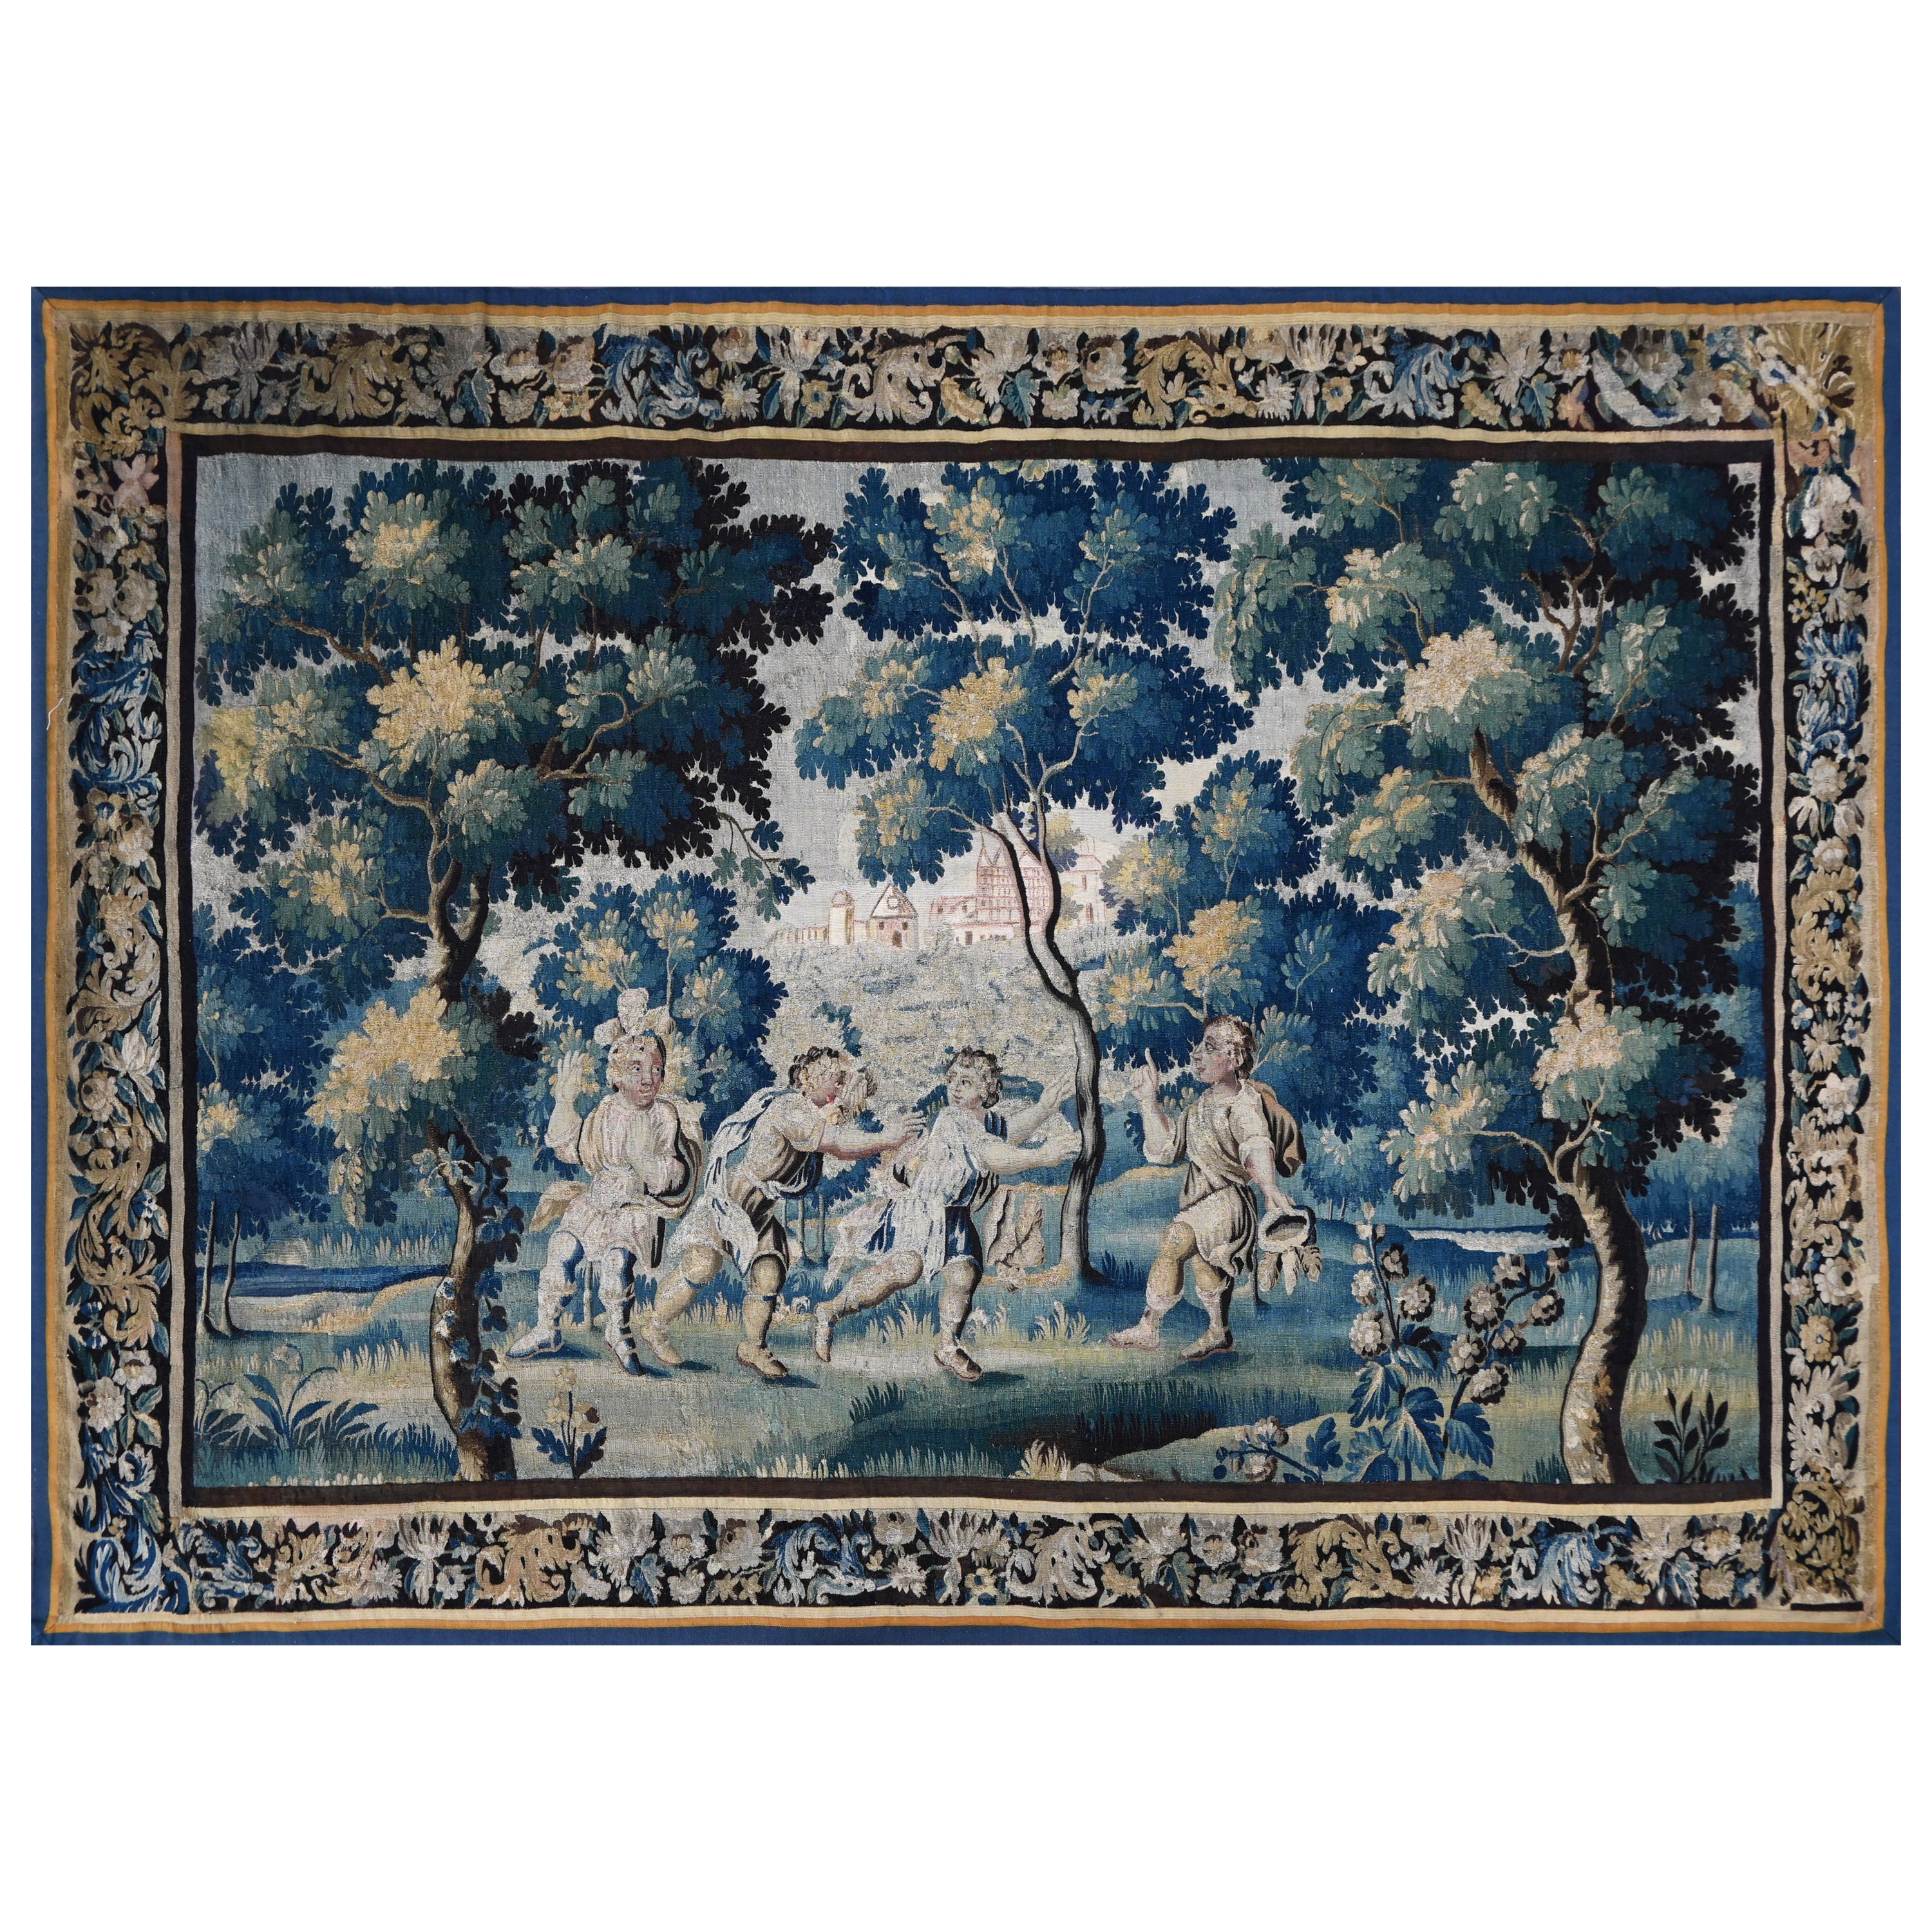 Flanders tapestry 17th century - Children's games - L3m55xH2m40 - No. 1367 For Sale